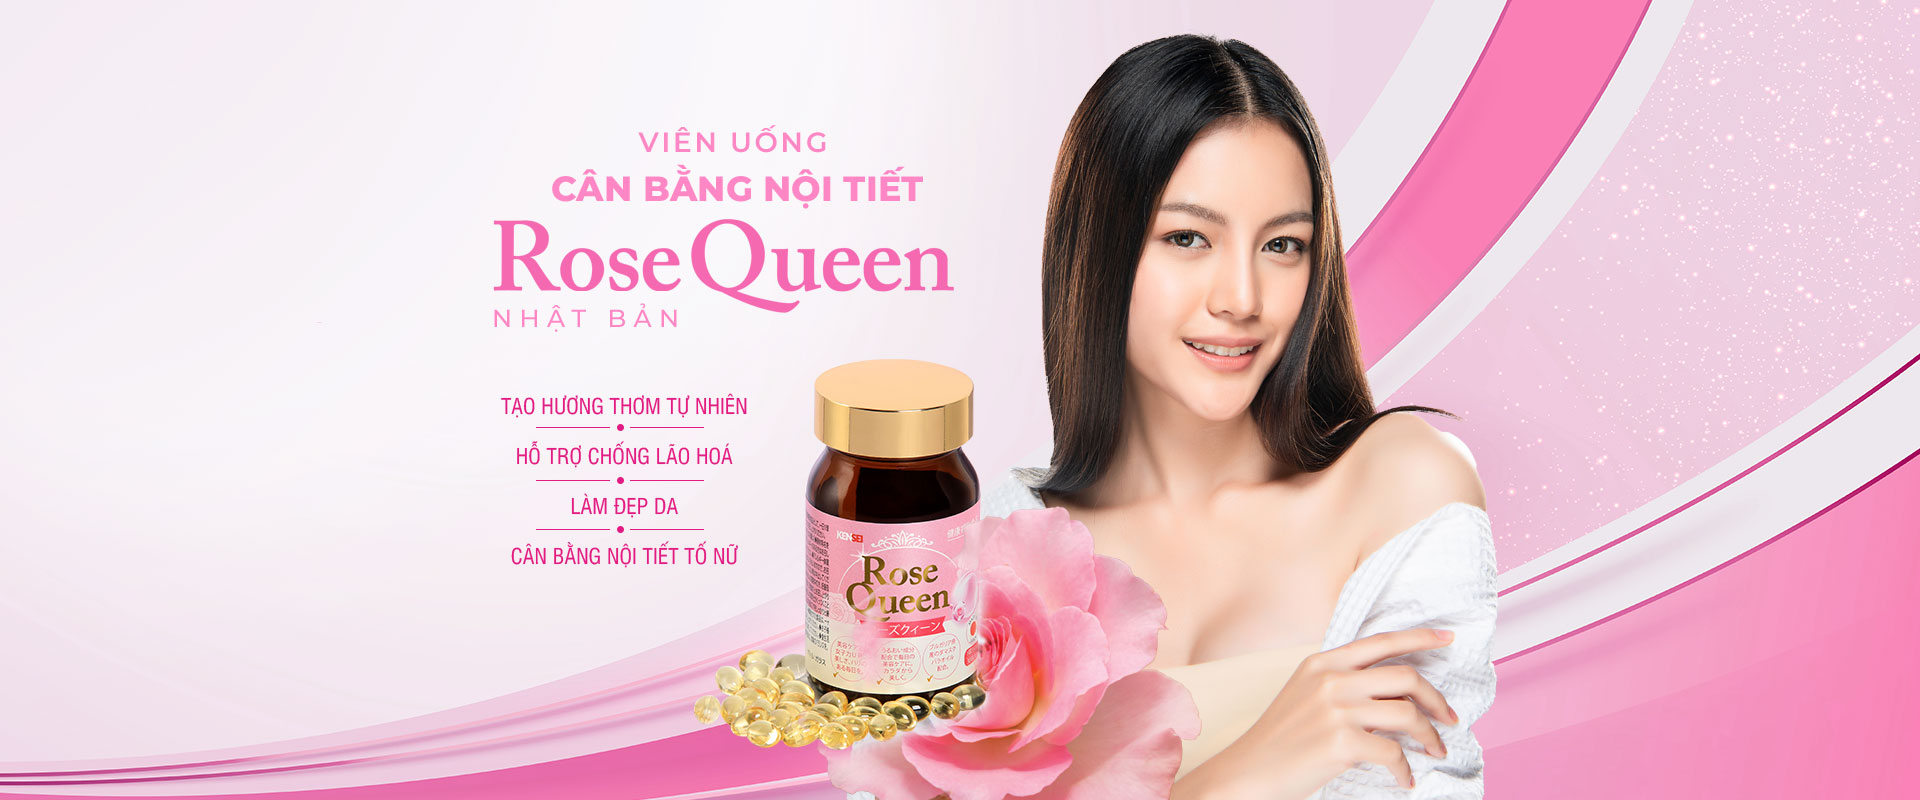 rose queen banner Trang chủ Go1care